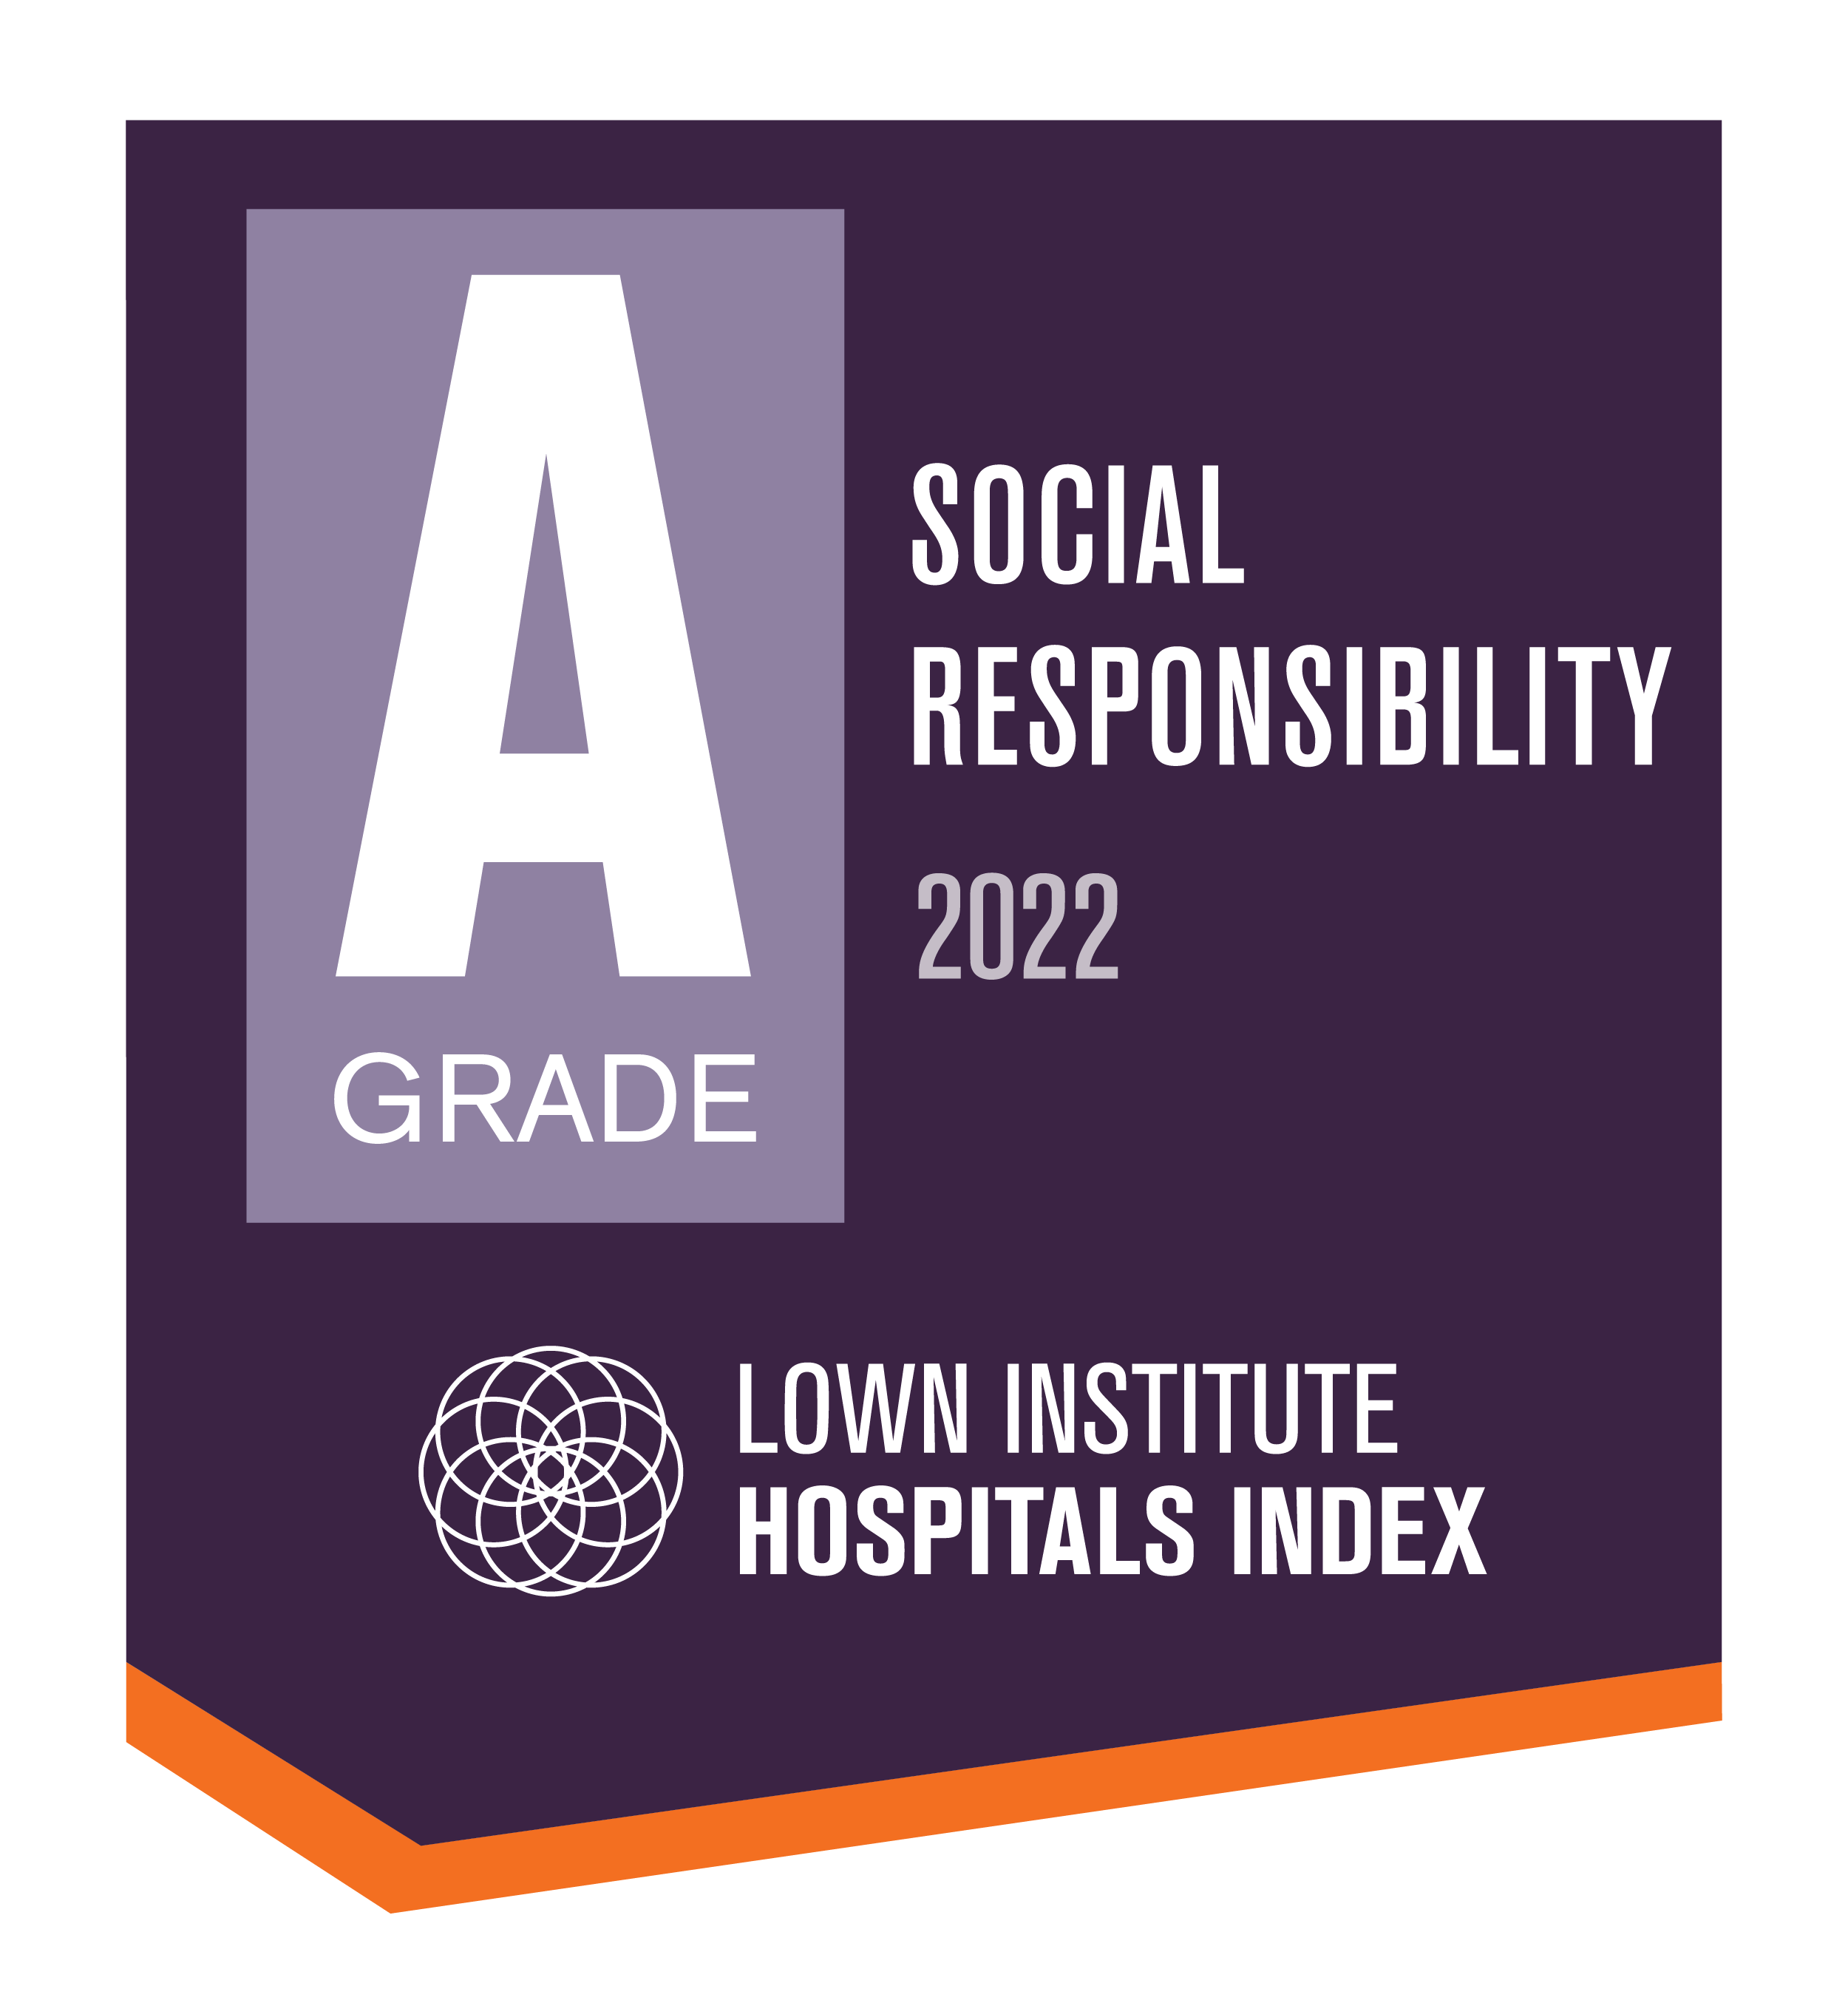 2022 Lown Institute - A Grade for Social Responsibility